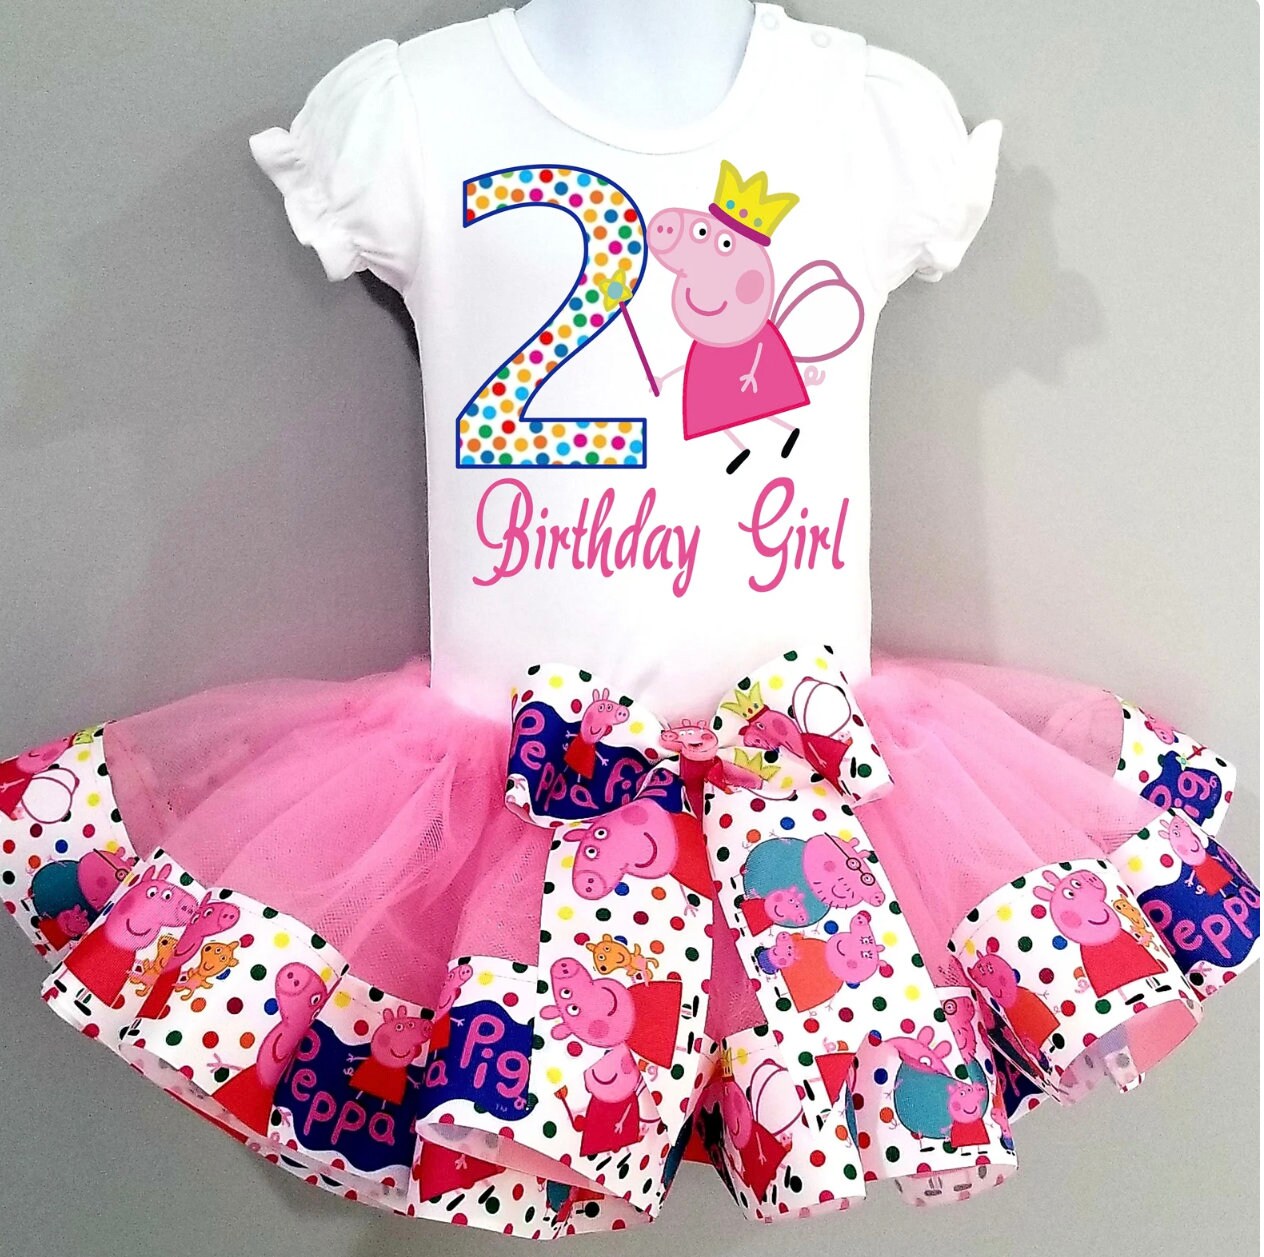 Girls 3 Piece PEPPA PIG Birthday Ribbon Tutu Outfit Includes Ribbon Tutu, Tshirt or Onesie and Matching Hair Bow